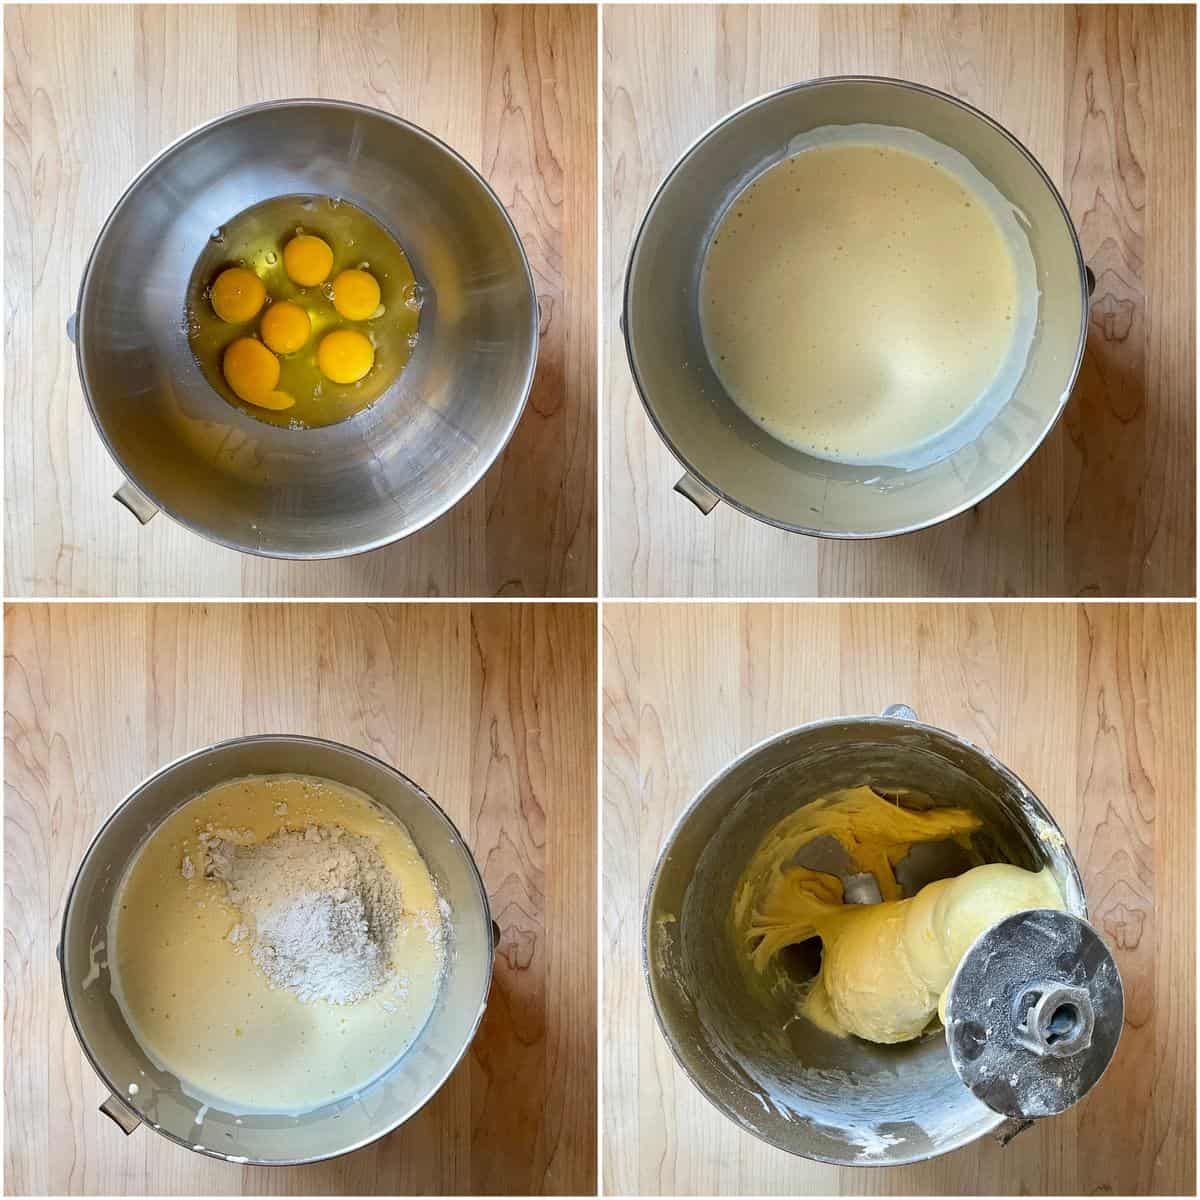 A photo collage of the taralli dough being made.